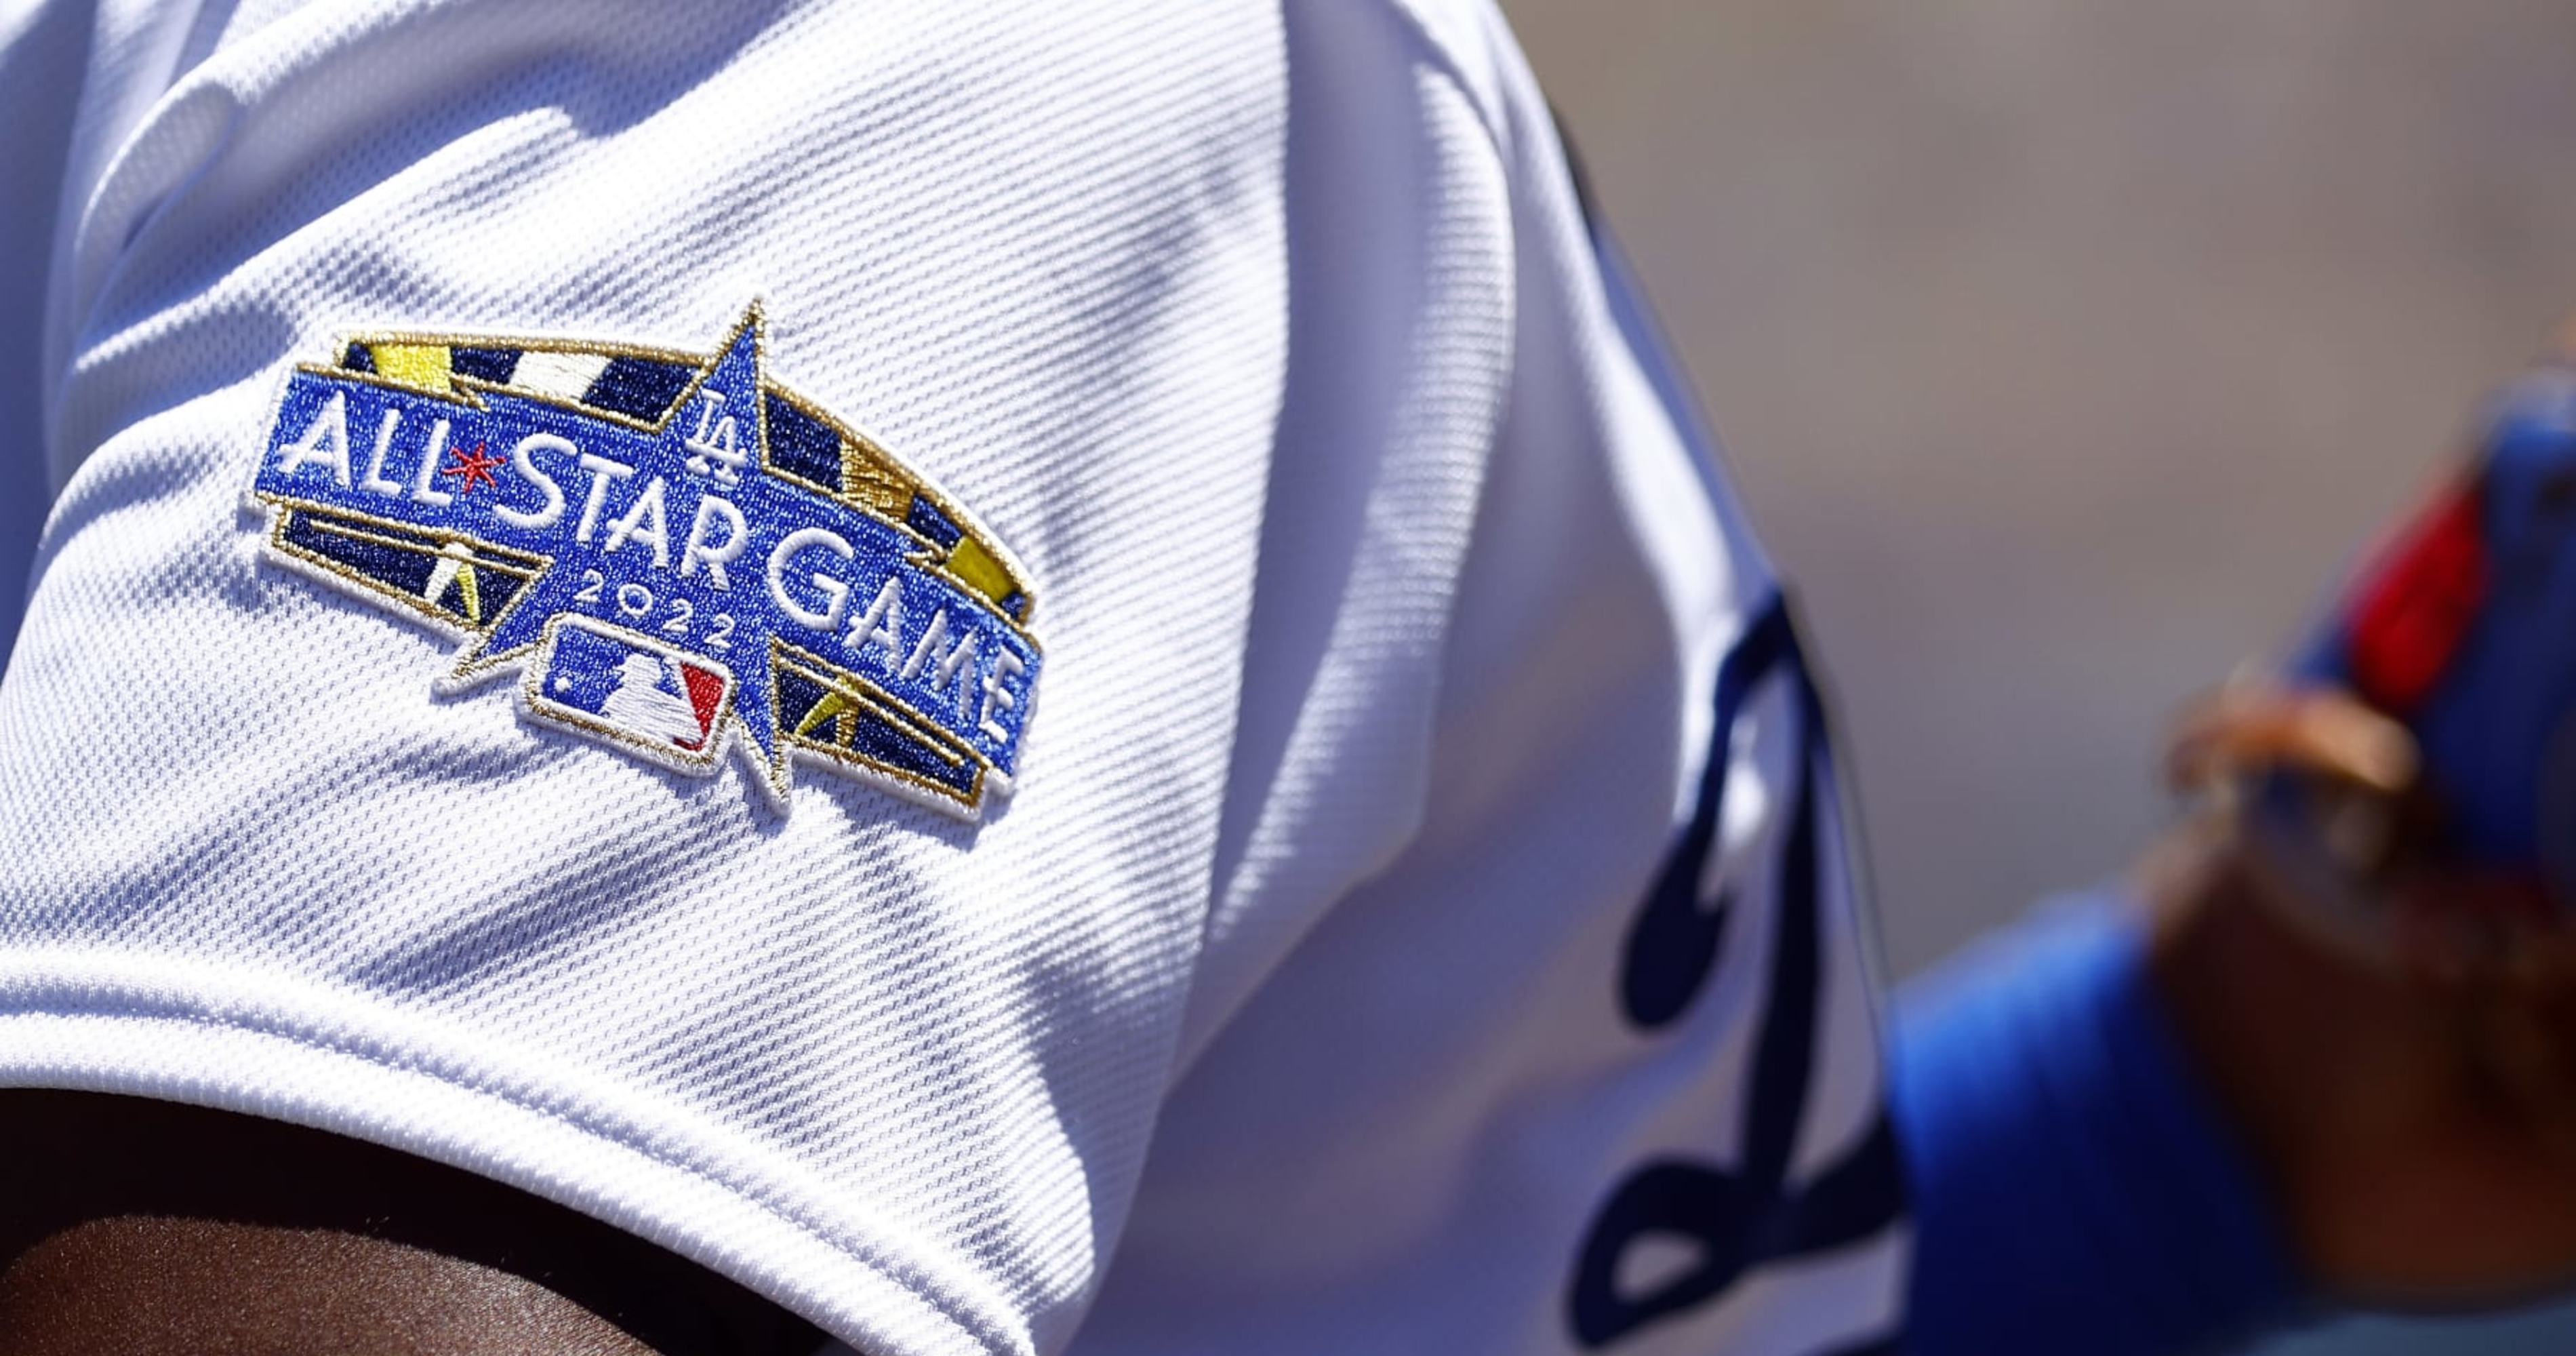 Dodger Stadium Workers Won't Strike During All-Star Game – NBC Los Angeles